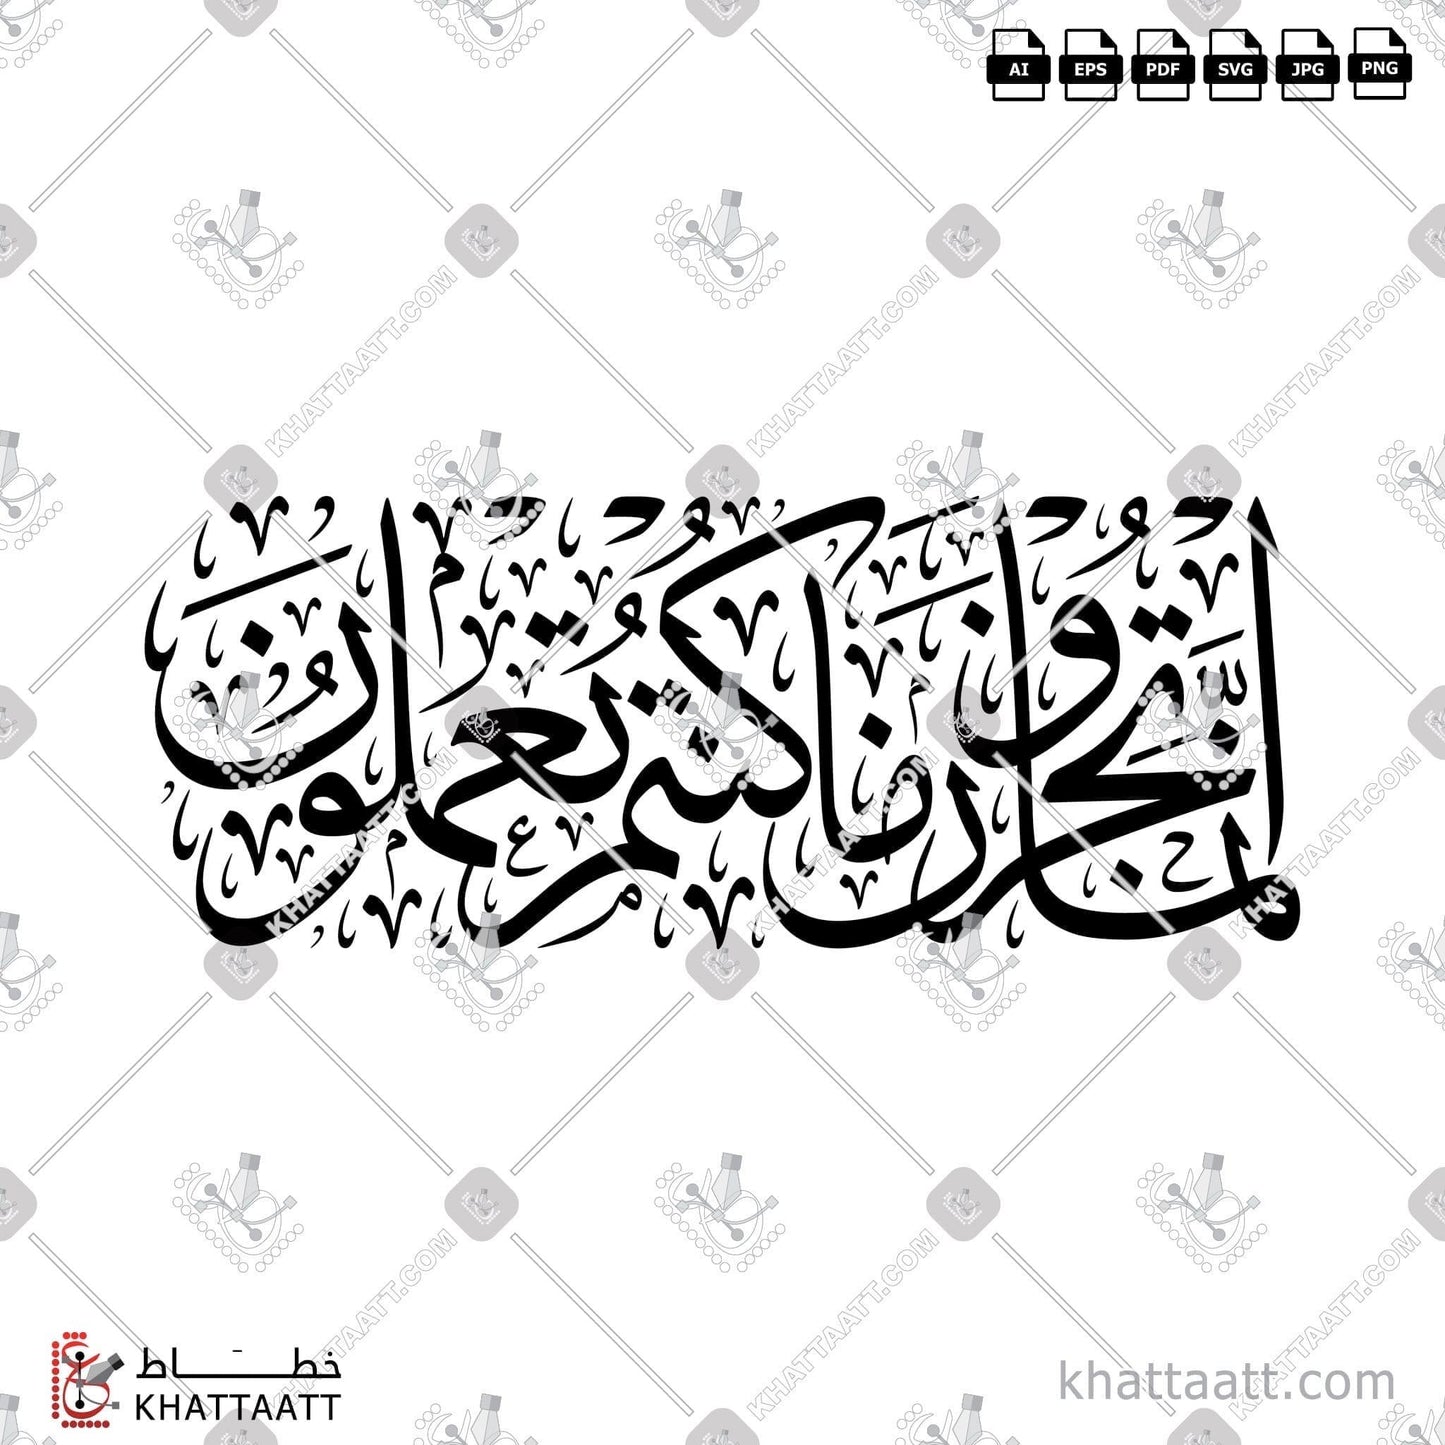 Download Arabic Calligraphy of إنما تجزون ما كنتم تعملون in Thuluth - خط الثلث in vector and .png